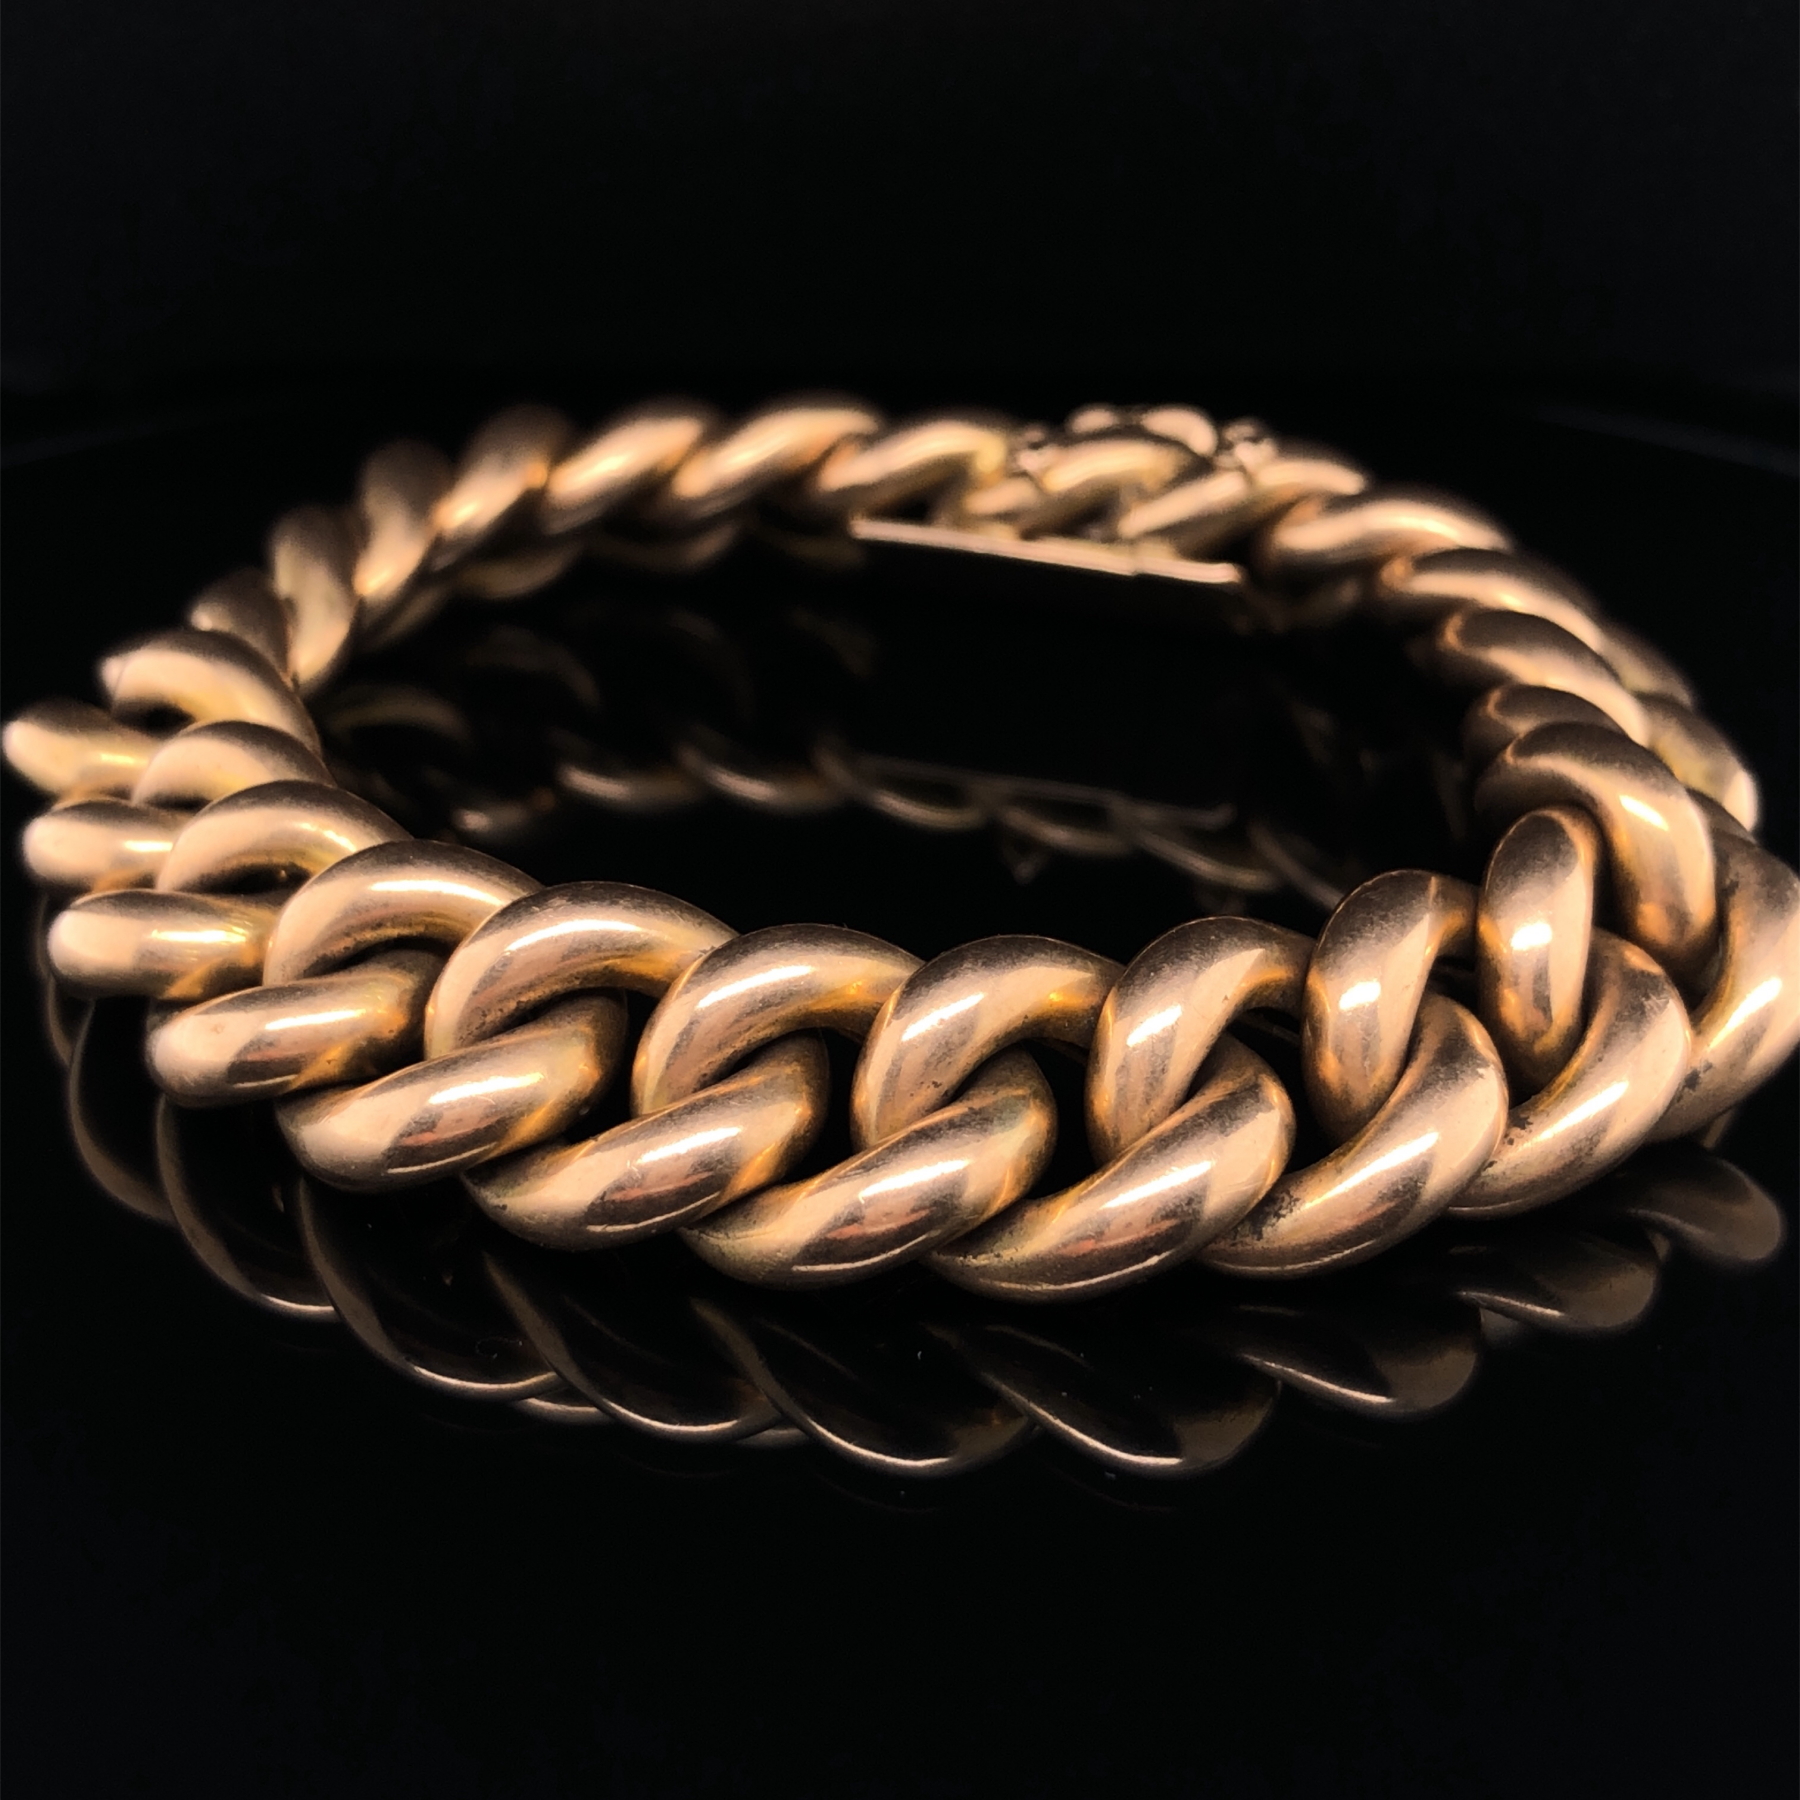 AN EDWARDIAN 15ct GOLD CURB BRACELET, COMPLETE WITH INTEGRAL CLASP AND SAFETY CHAIN. LENGTH APPROX - Image 5 of 5